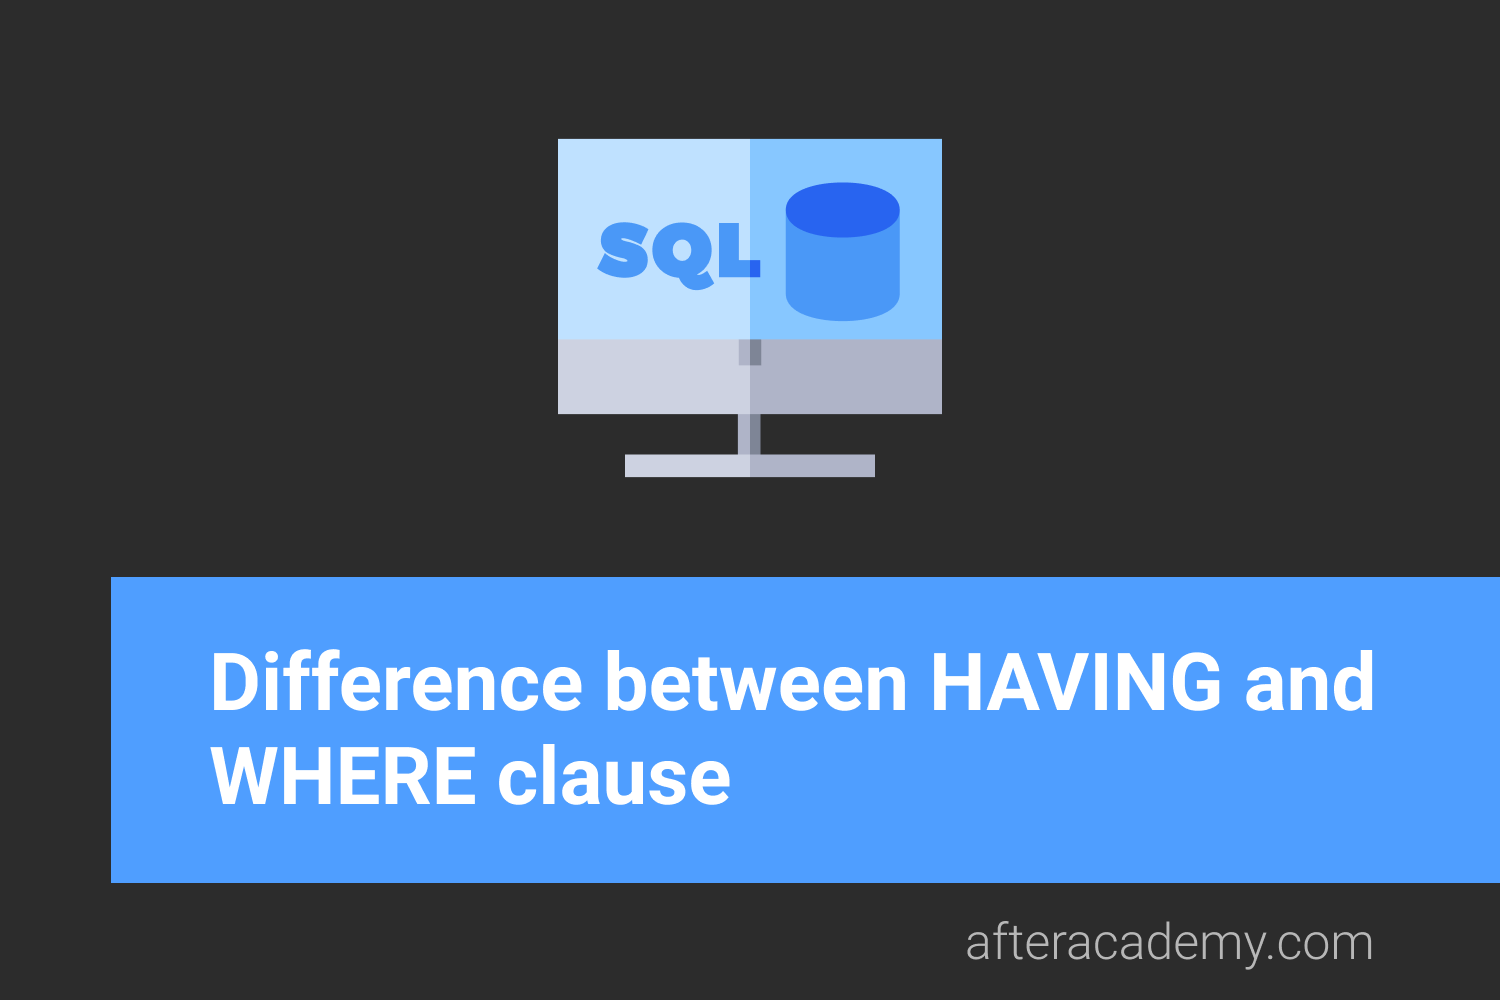 What is the difference between HAVING and WHERE clause?